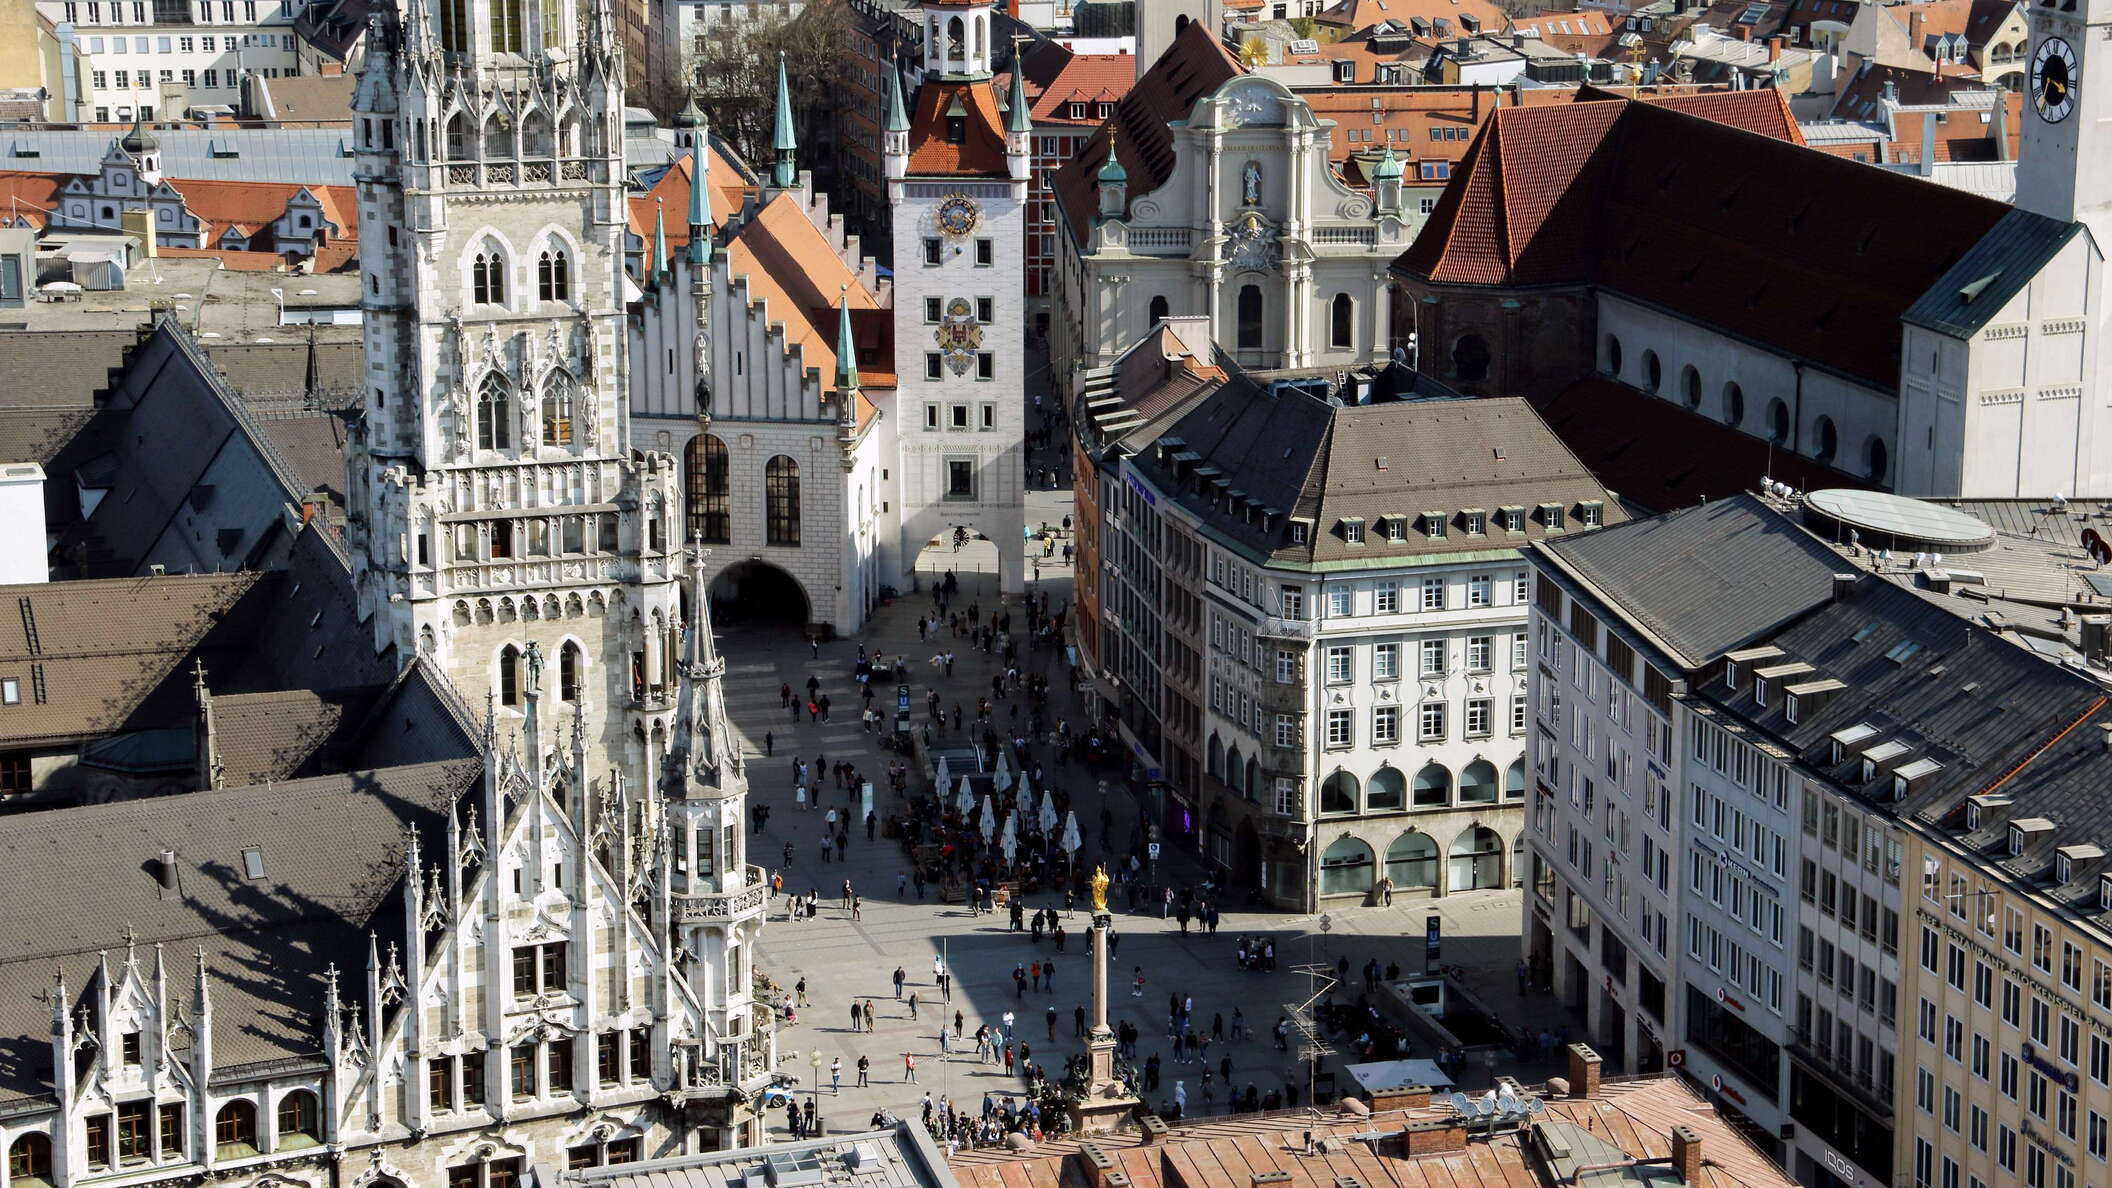 München | Marienplatz with New and Old Town Hall